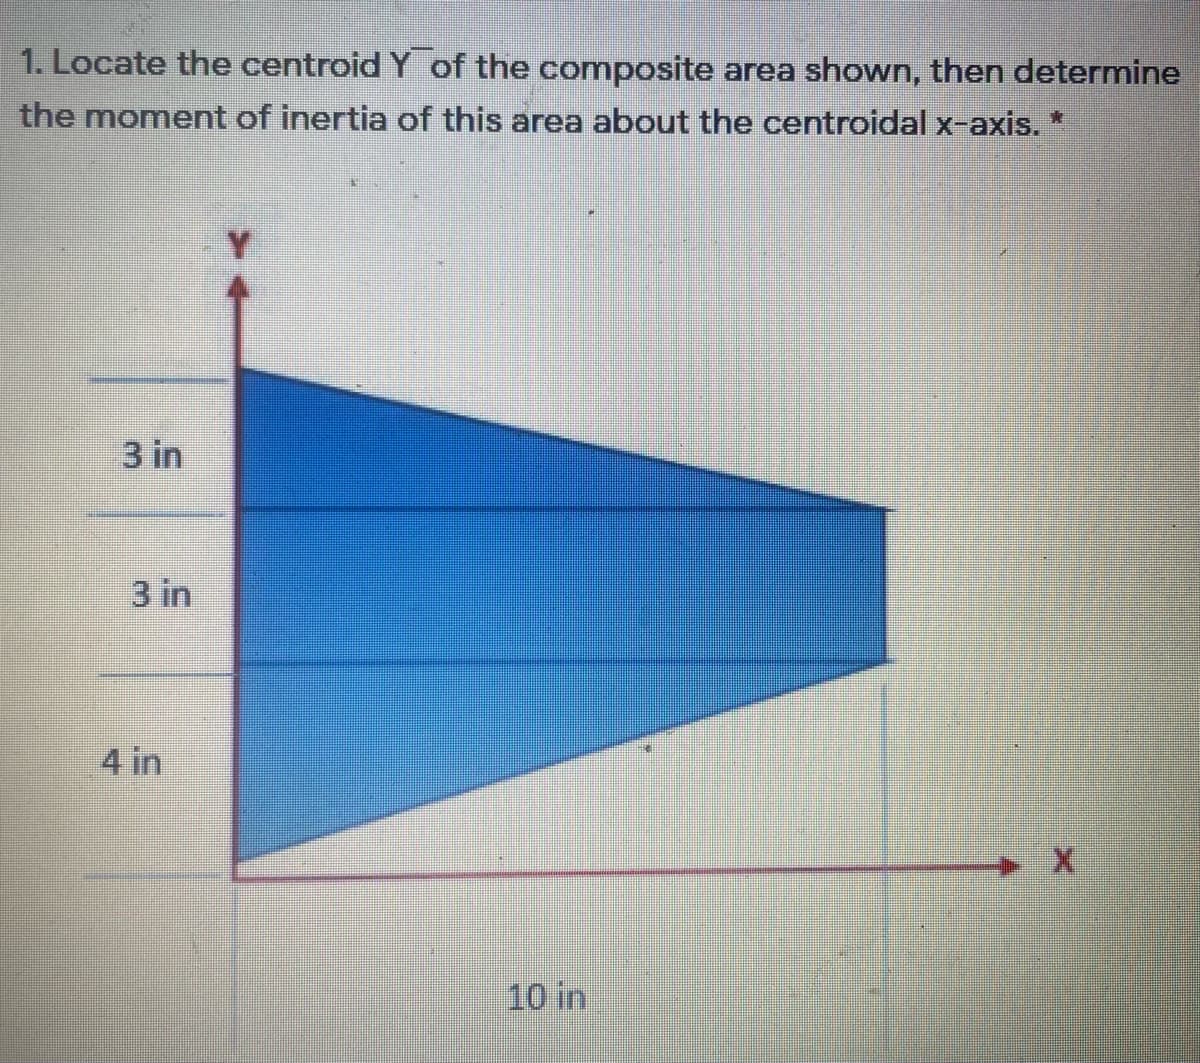 1. Locate the centroid Y of the composite area shown, then determine
the moment of inertia of this area about the centroidal x-axis."
3 in
3 in
4 in
10 in
